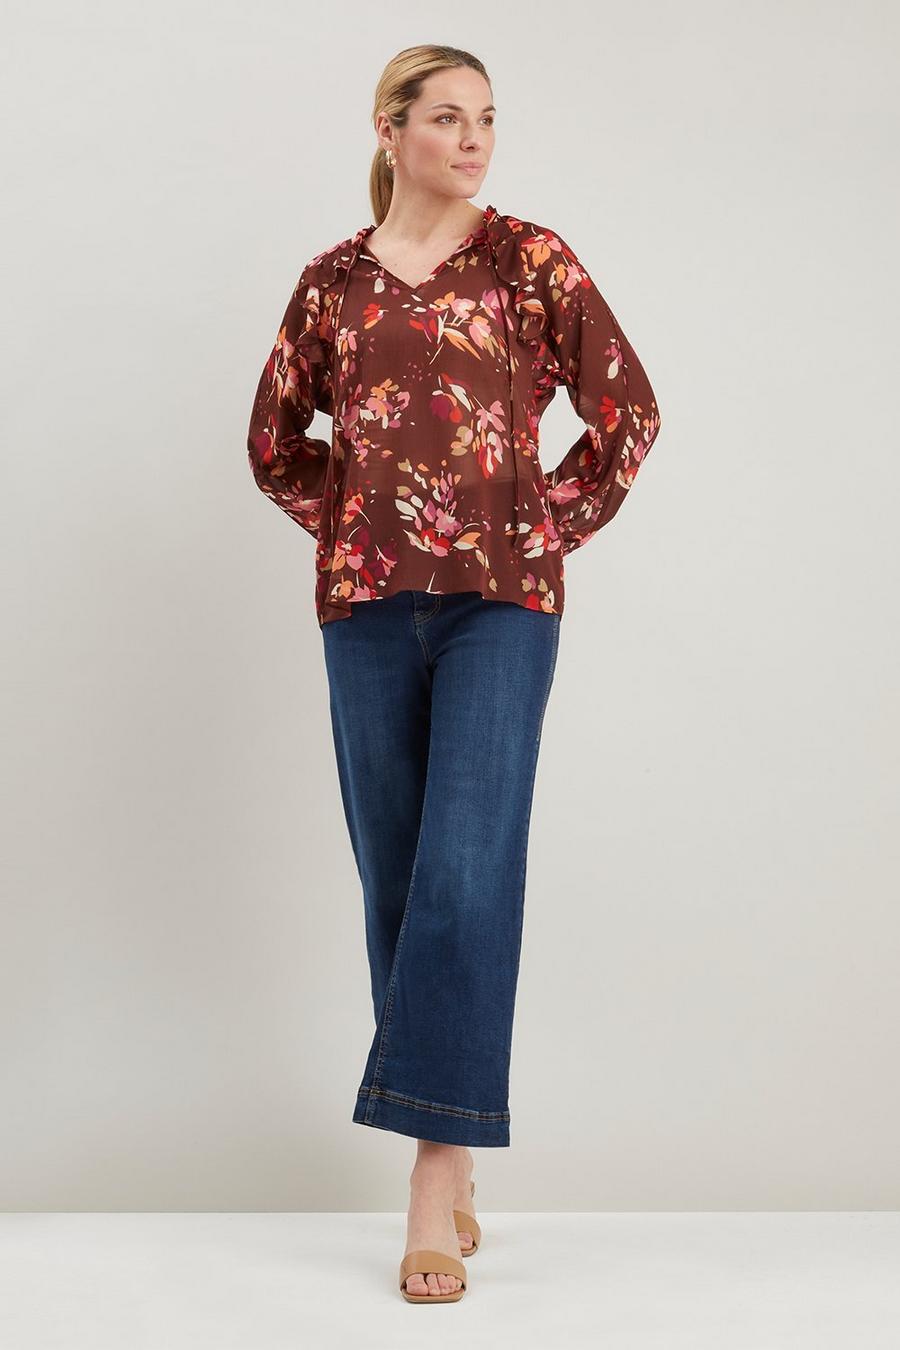 Brown Floral Ruffle Tie Neck Top